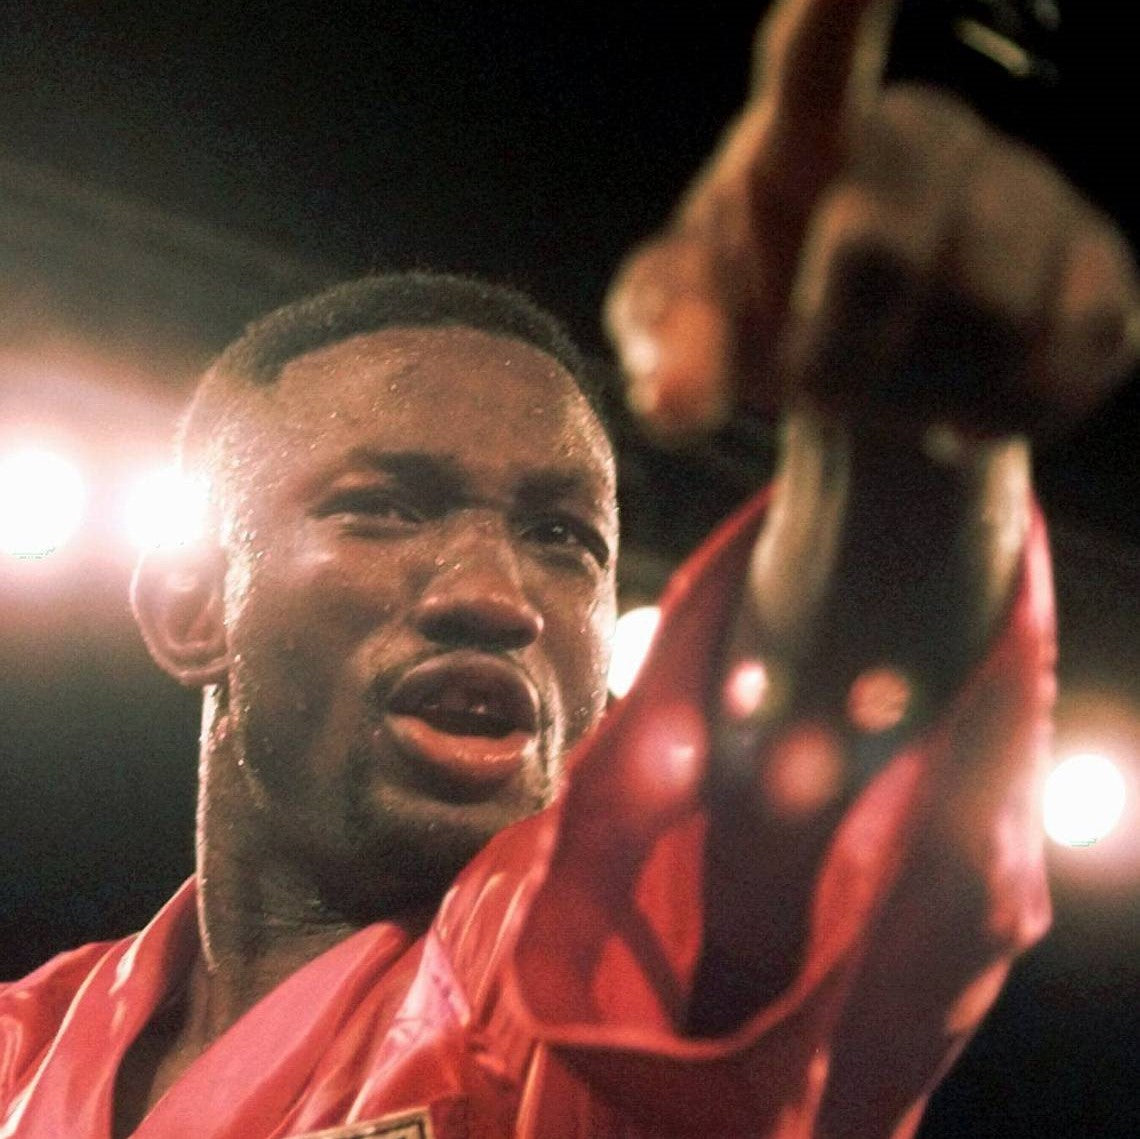 [NEWS] Former U.S World Boxing Champion, Pernell Whitaker dies at 55